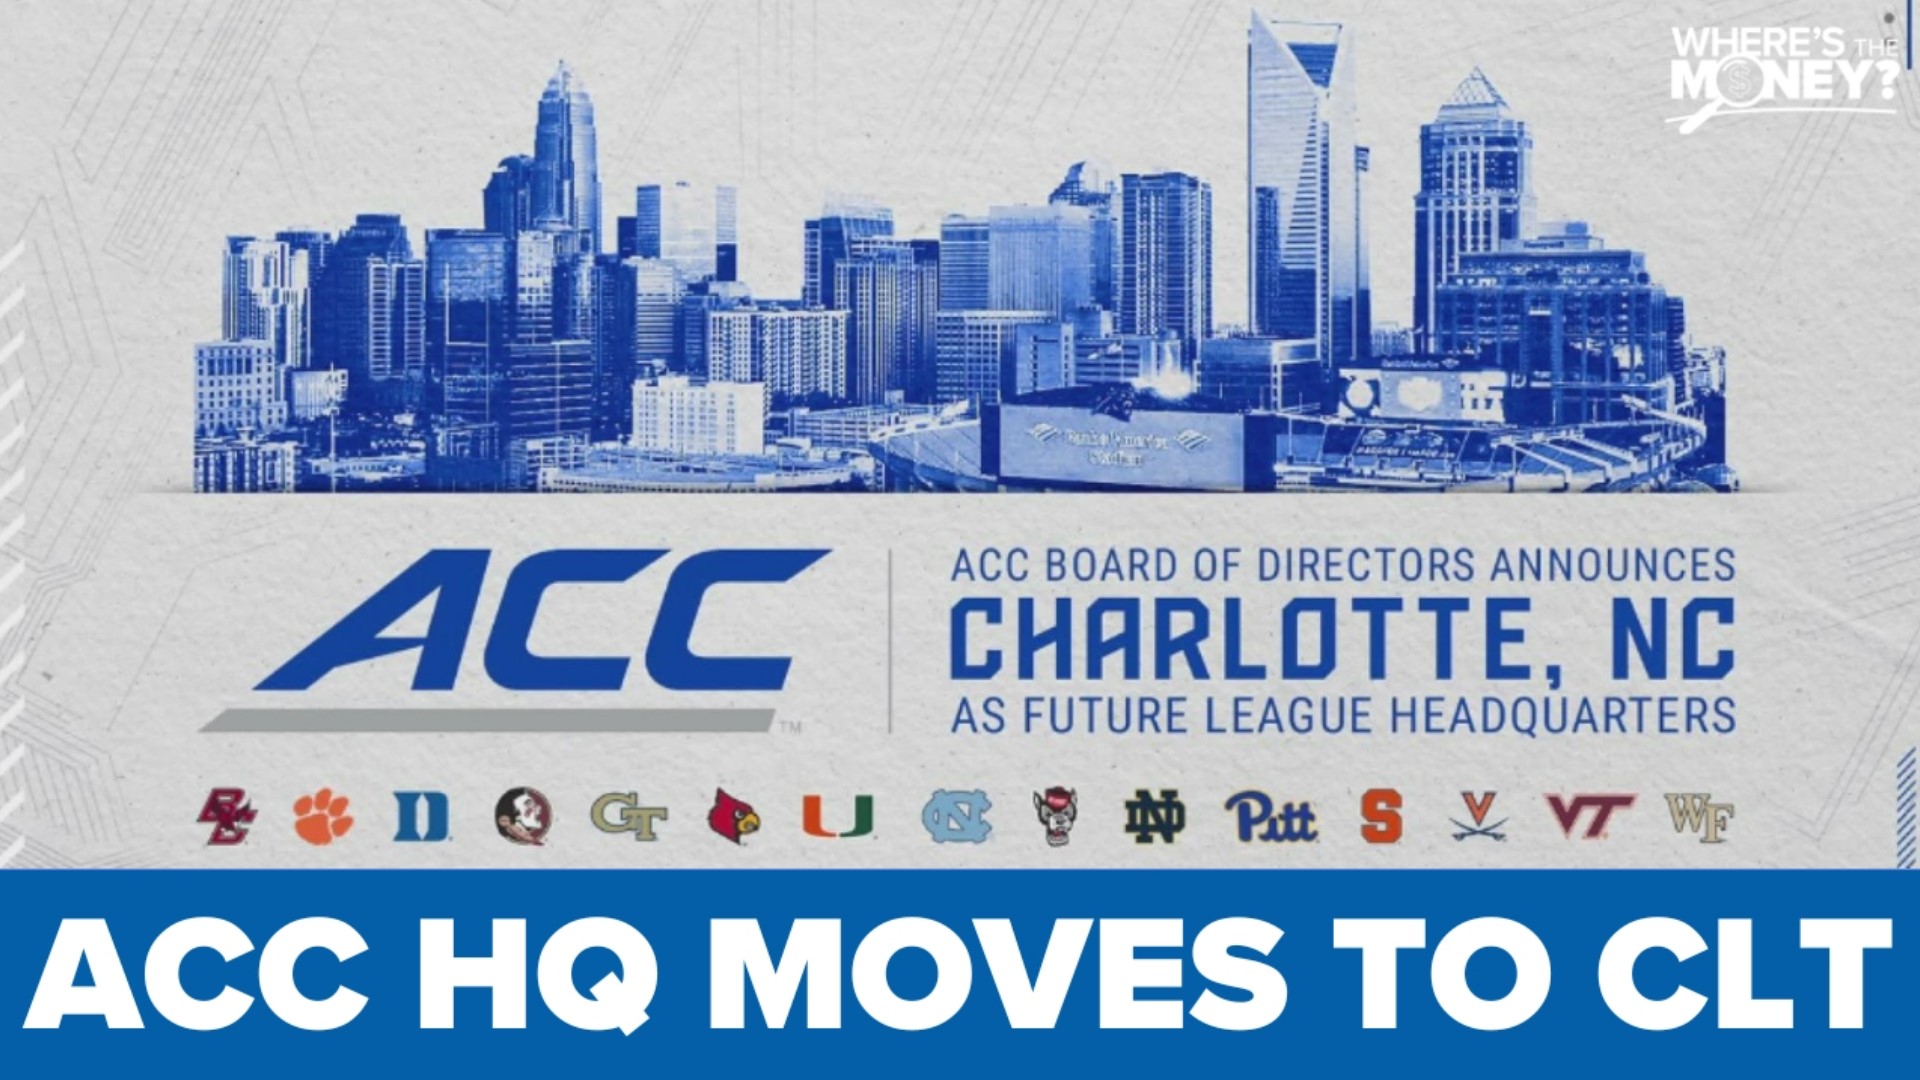 The ACC is moving its headquarters from Greensboro to Charlotte. The move is set to give the Queen City a financial boost.